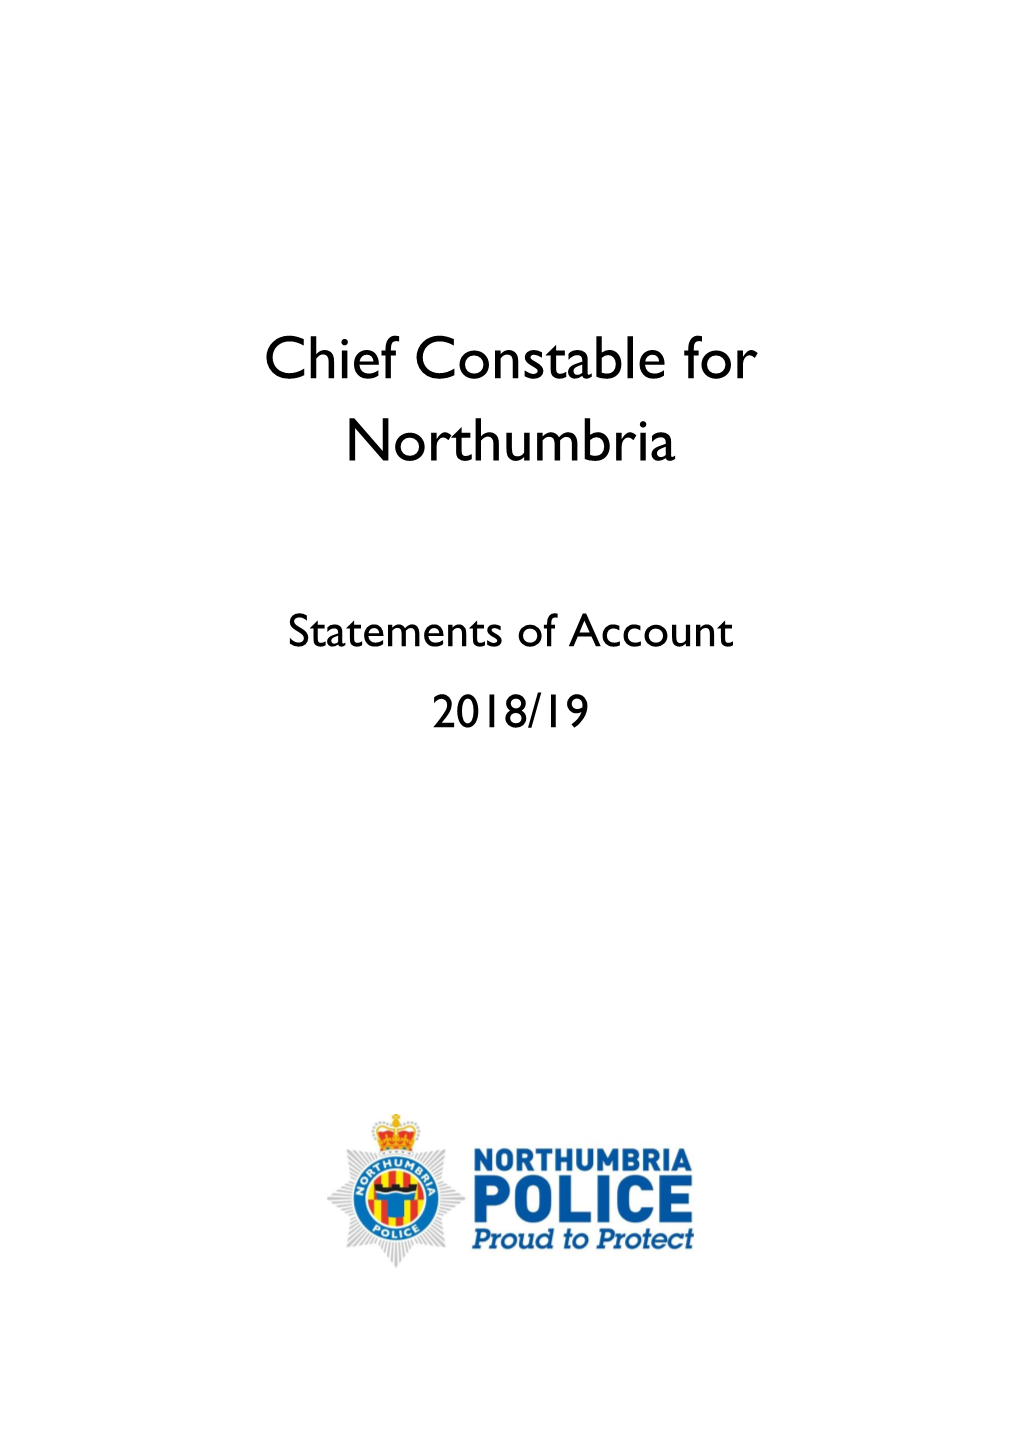 Chief Constable for Northumbria